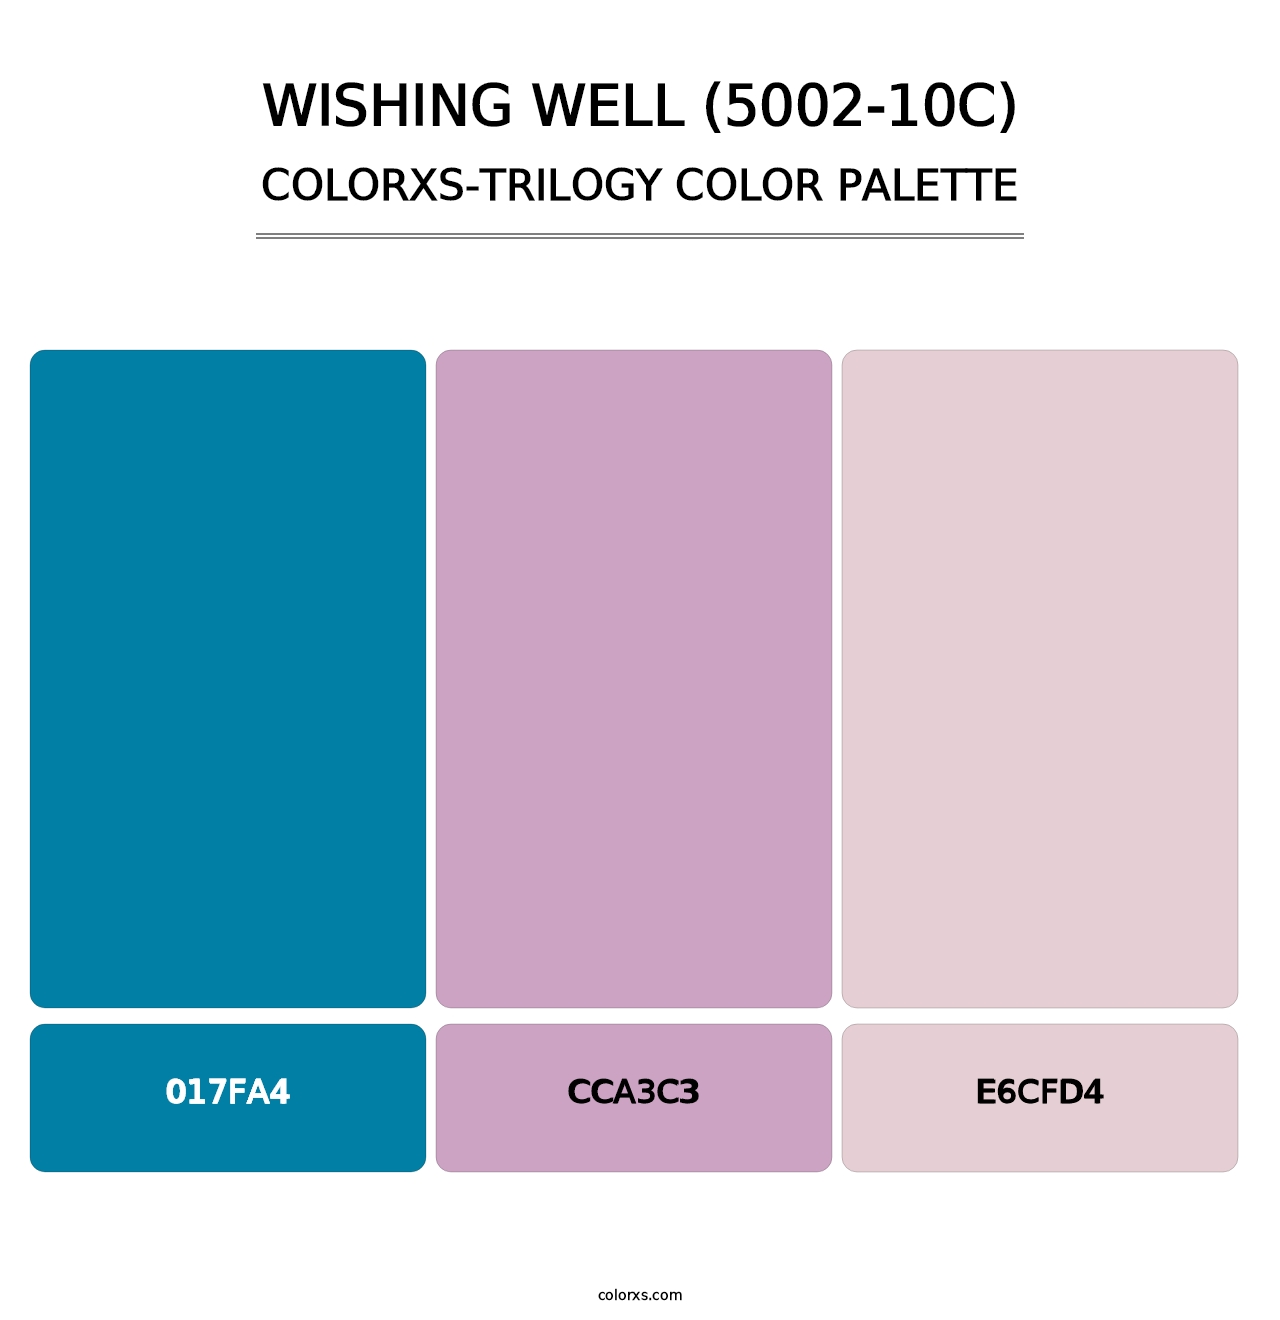 Wishing Well (5002-10C) - Colorxs Trilogy Palette